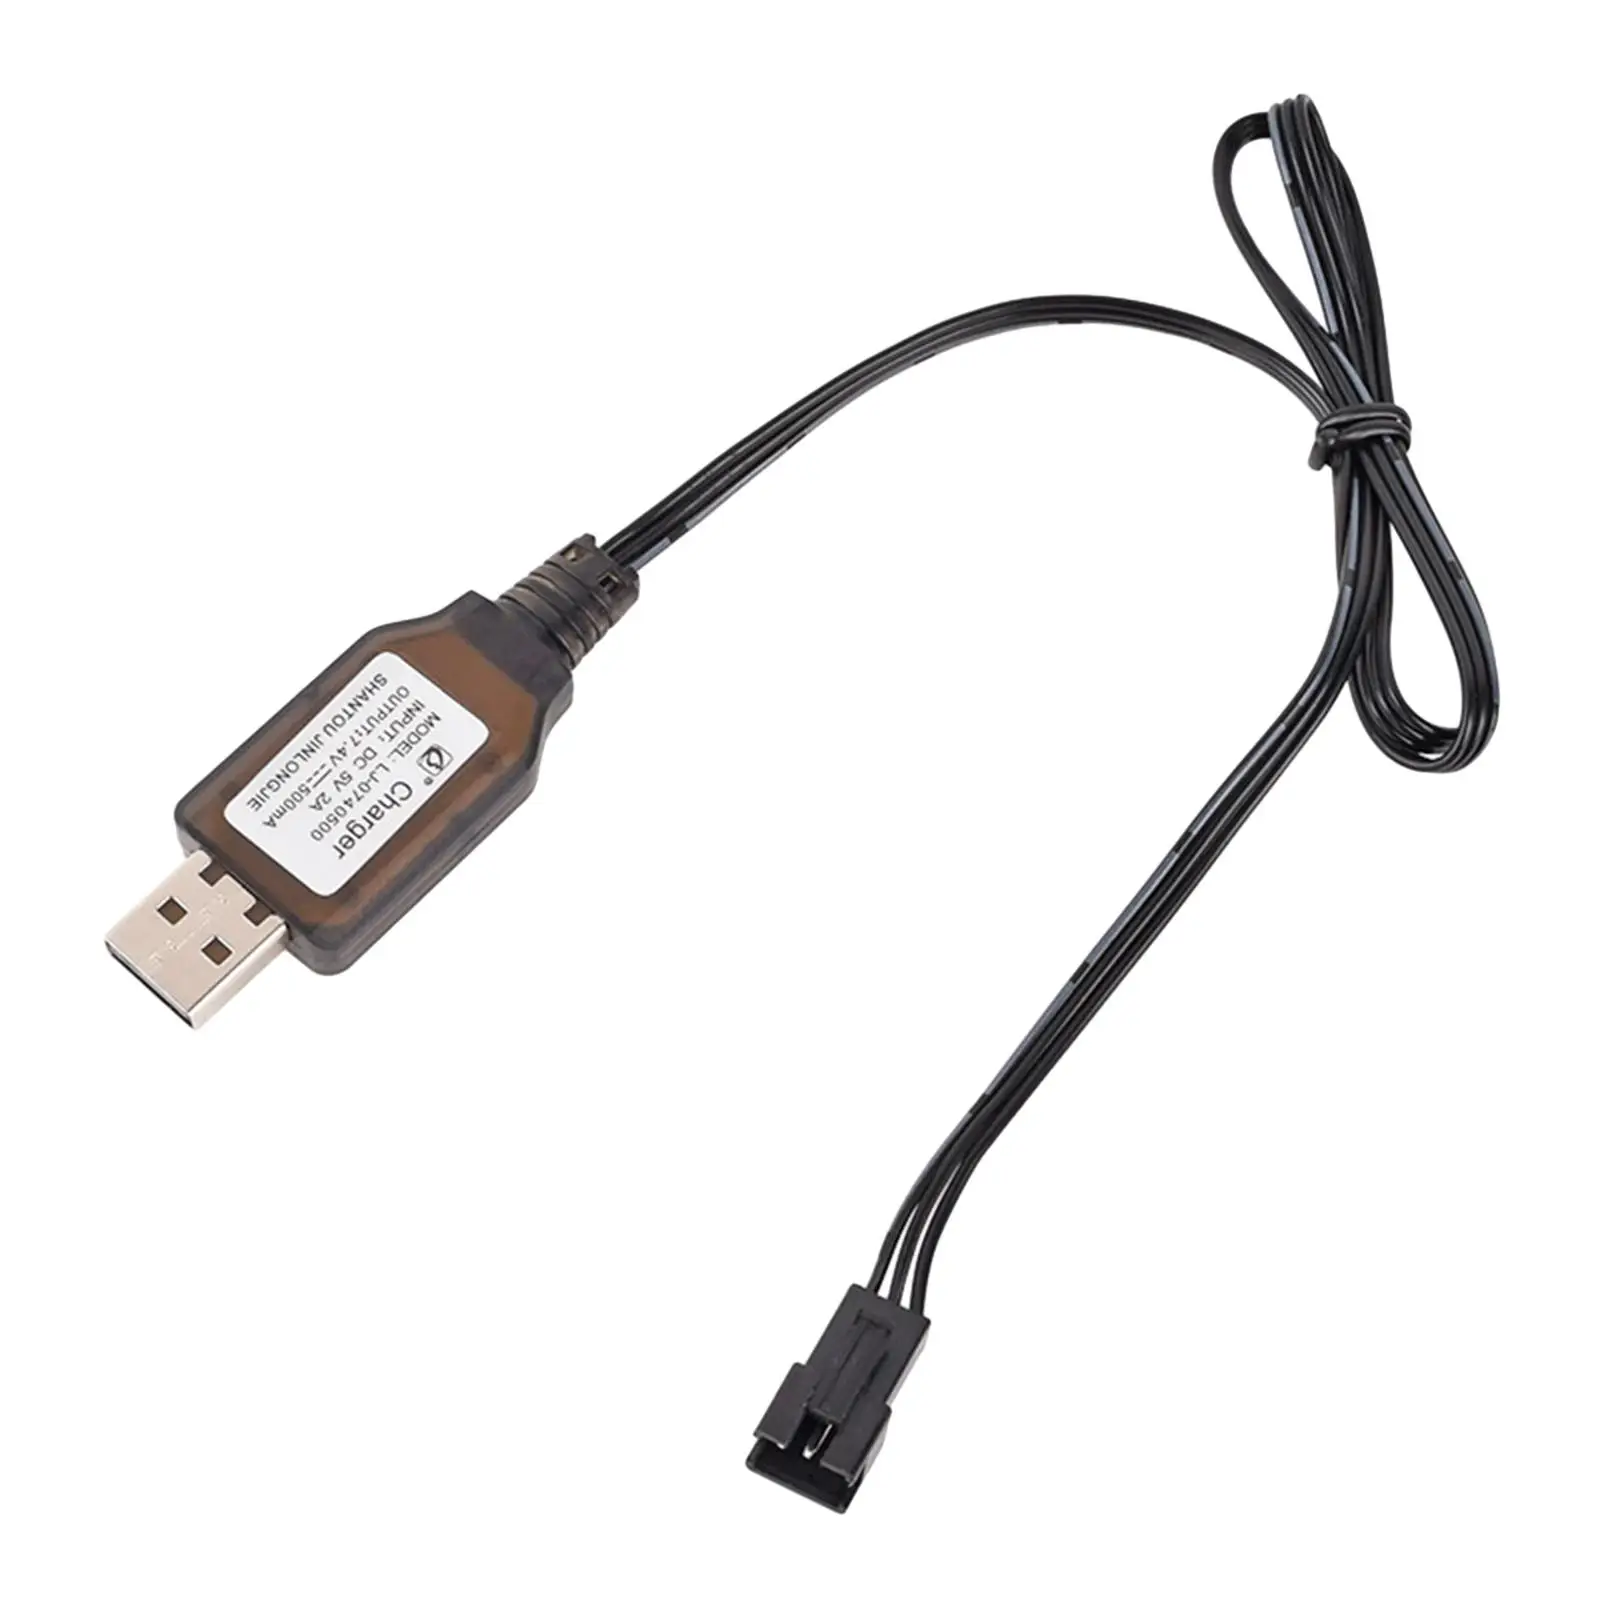 Battery USB Charger Cable 7.4V 3 Pin Universal 500MA with SM-3P Plug Connector for RC Car Remote Control Toys Tank Boat Buggy